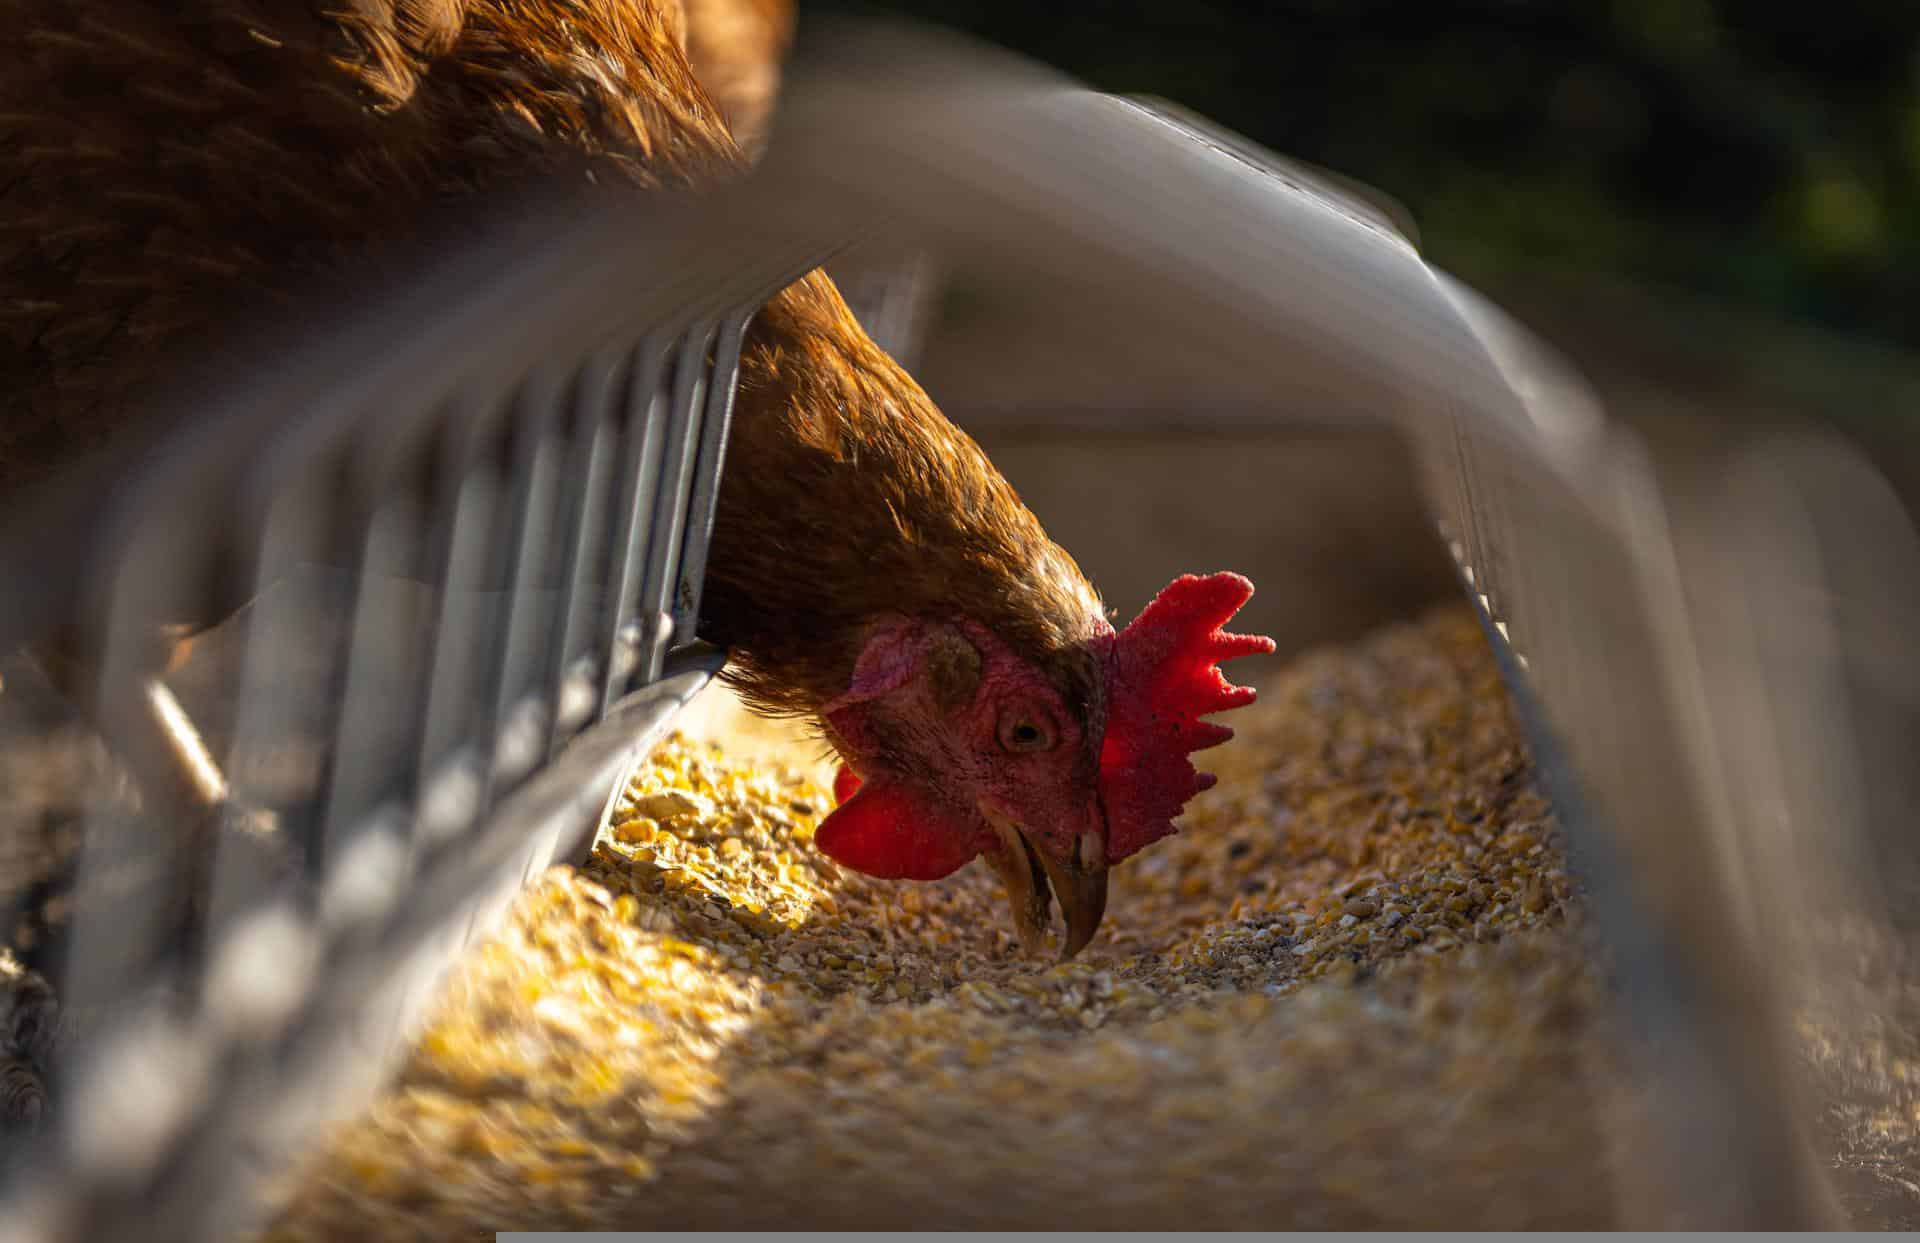 Machine learning can reduce risk of antibiotic resistance in chickens and humans as well